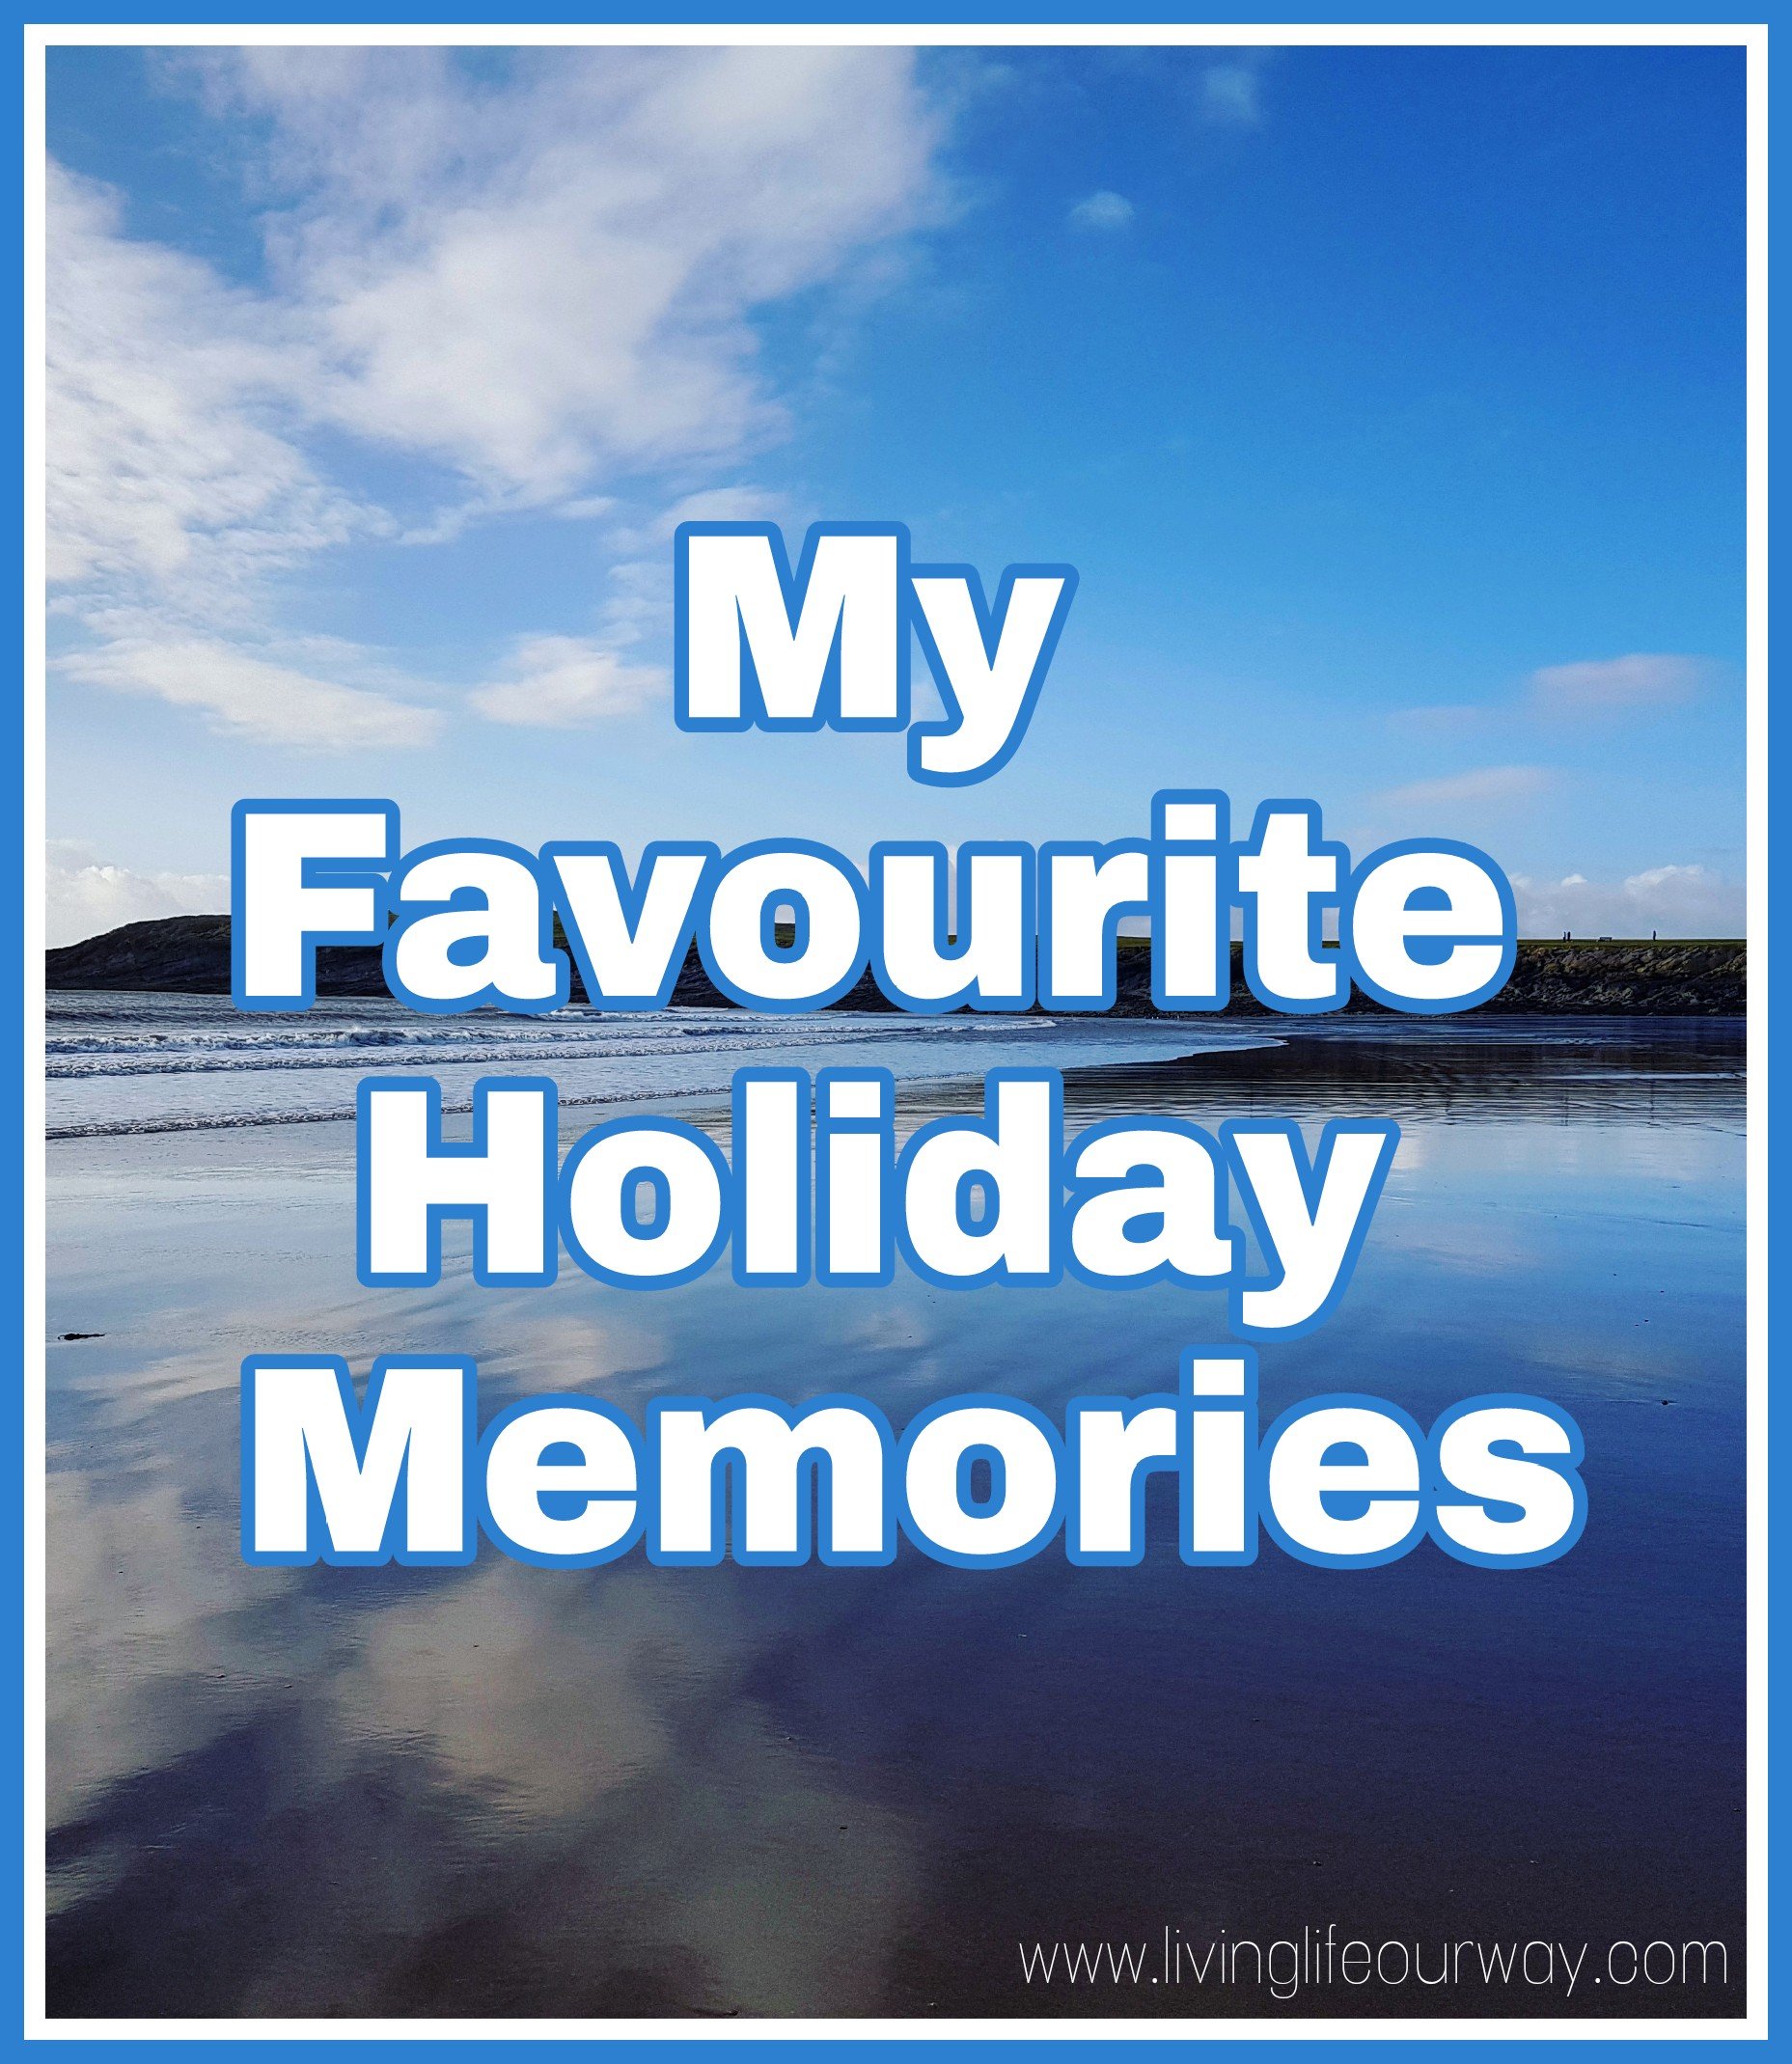 My Favourite Holiday Memories title with beach background